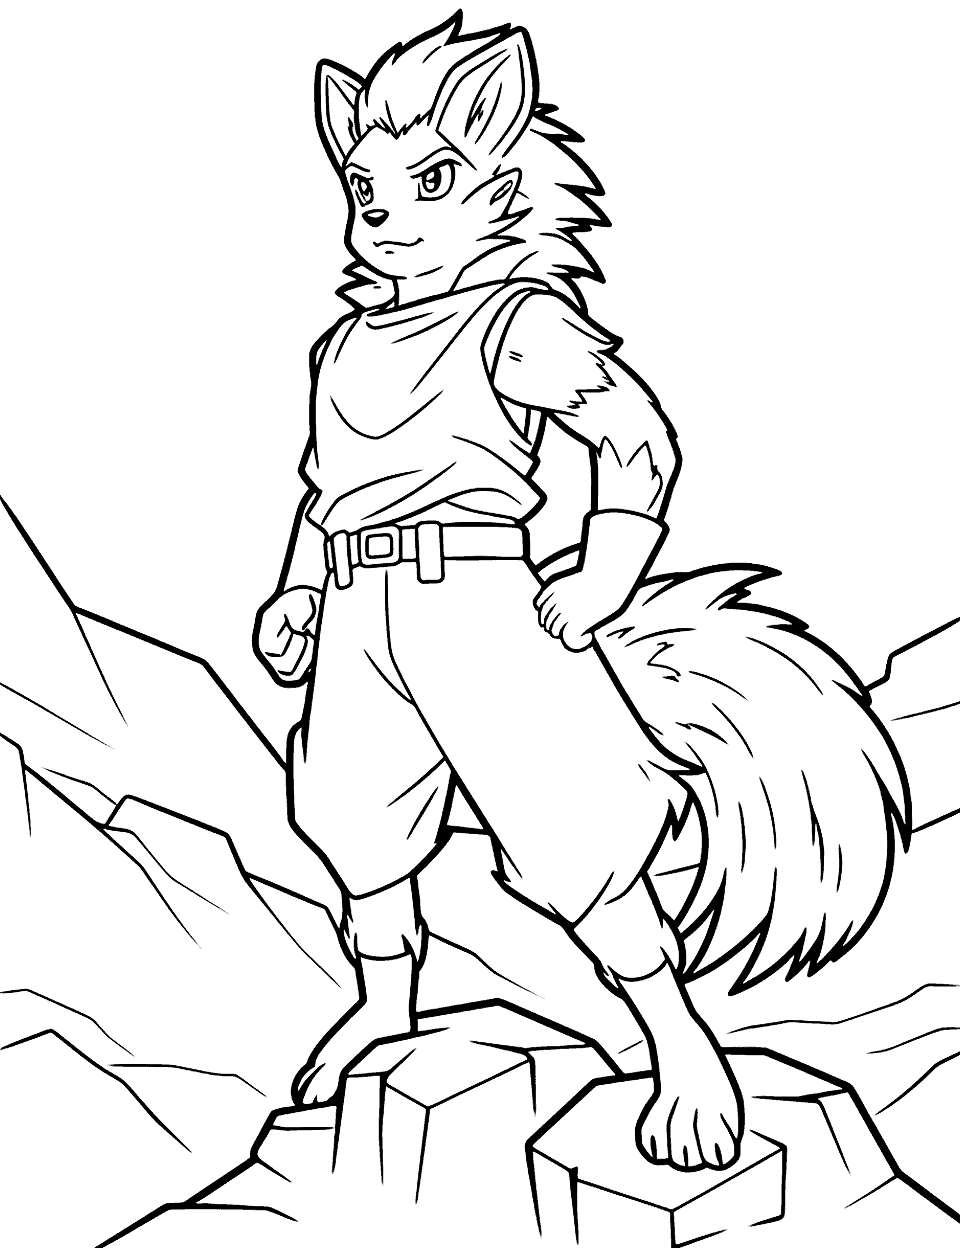 Anime Wolf Coloring Page - A majestic anime wolf standing on a cliff, ready to howl at the moon.